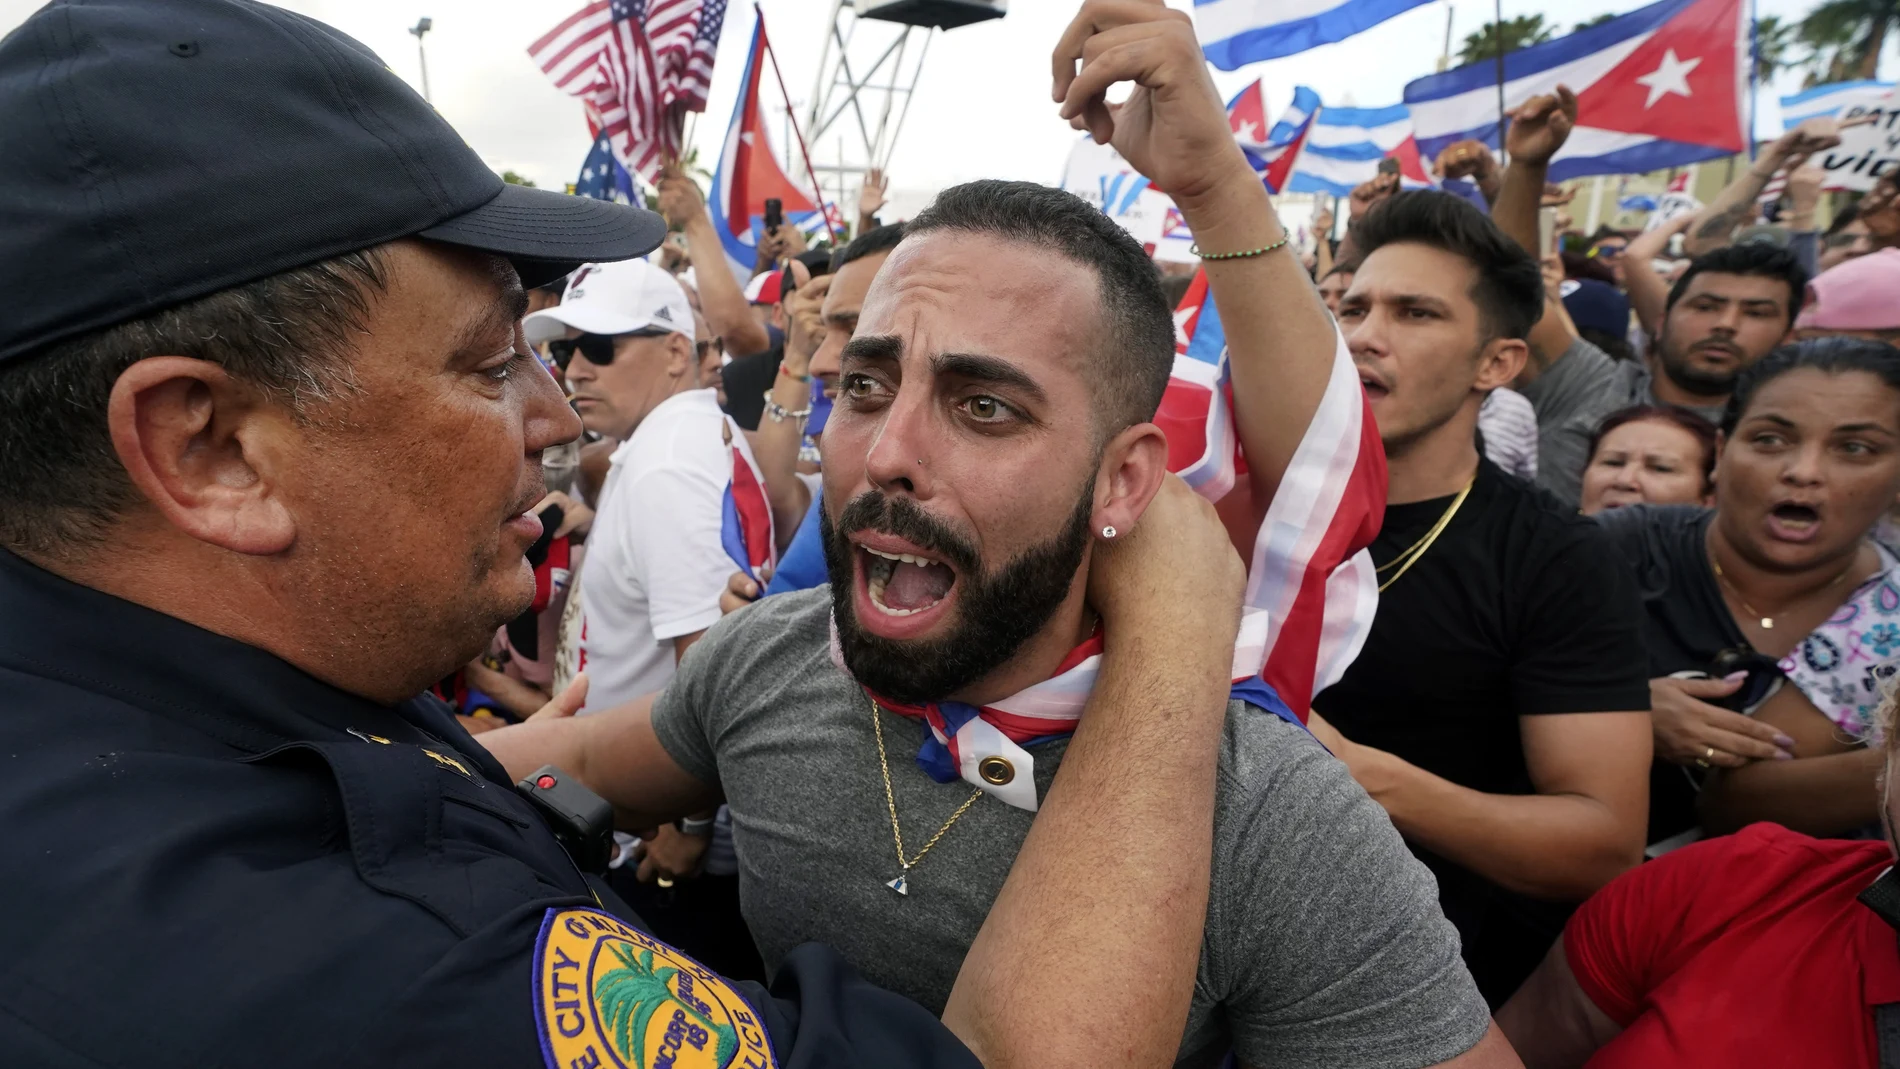 Miami Police Chief Art Acevedo, left, hugs a demonstrator, Wednesday, July 14, 2021, in Miami's Little Havana neighborhood, as people rally in support of antigovernment demonstrations in Cuba. (AP Photo/Wilfredo Lee)